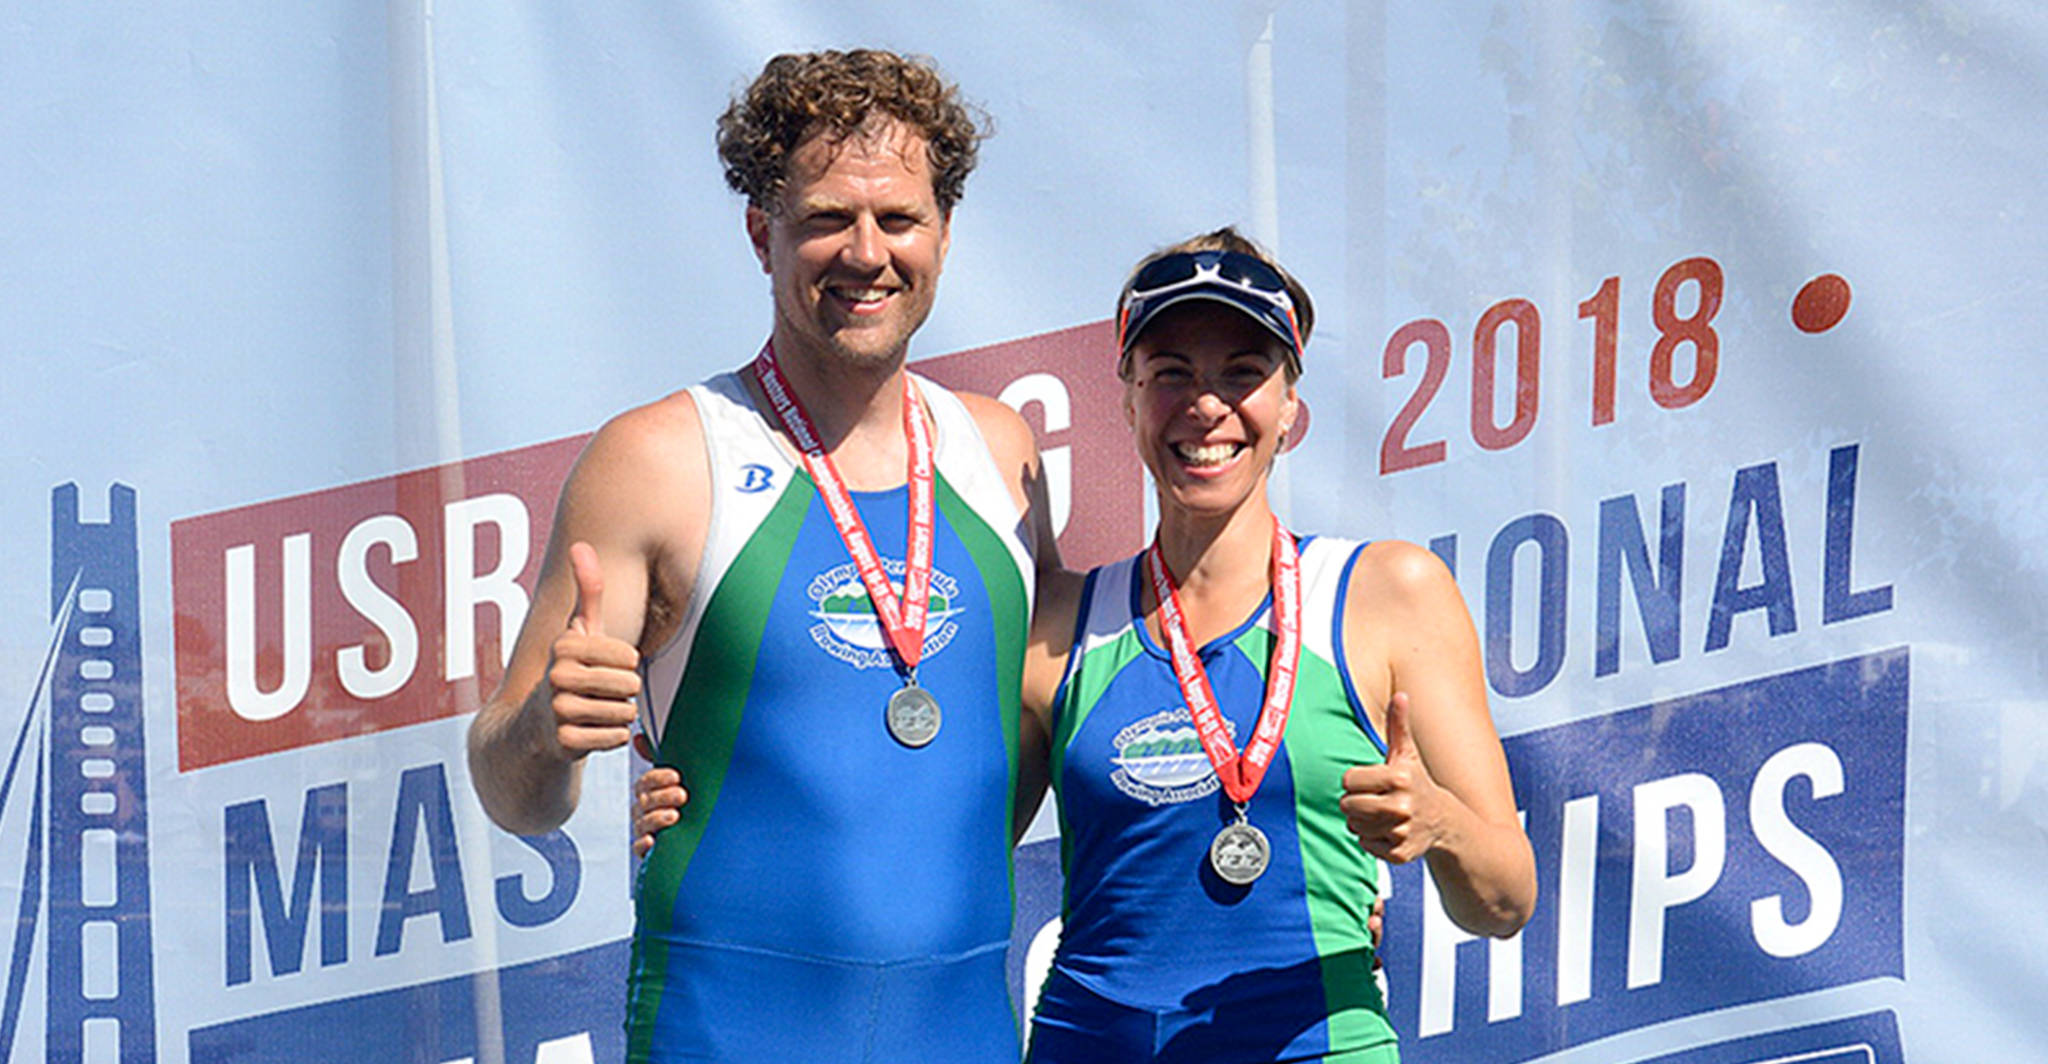 AREA SPORTS BRIEFS: Olympic Peninsula Rowing Association members come home with medals